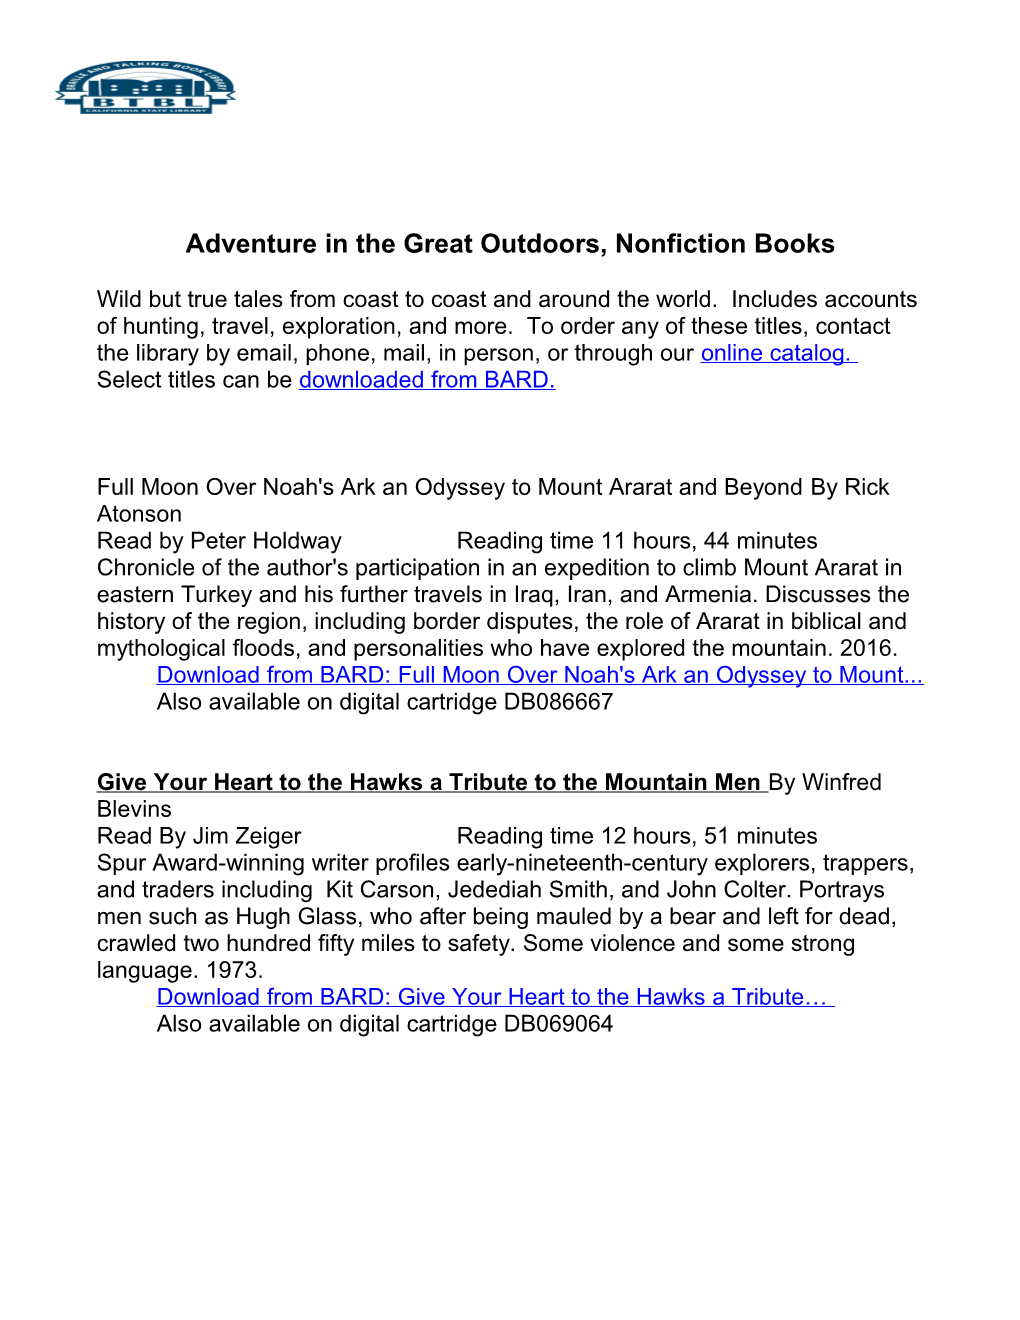 Adventure in the Great Outdoors Nonfiction Books